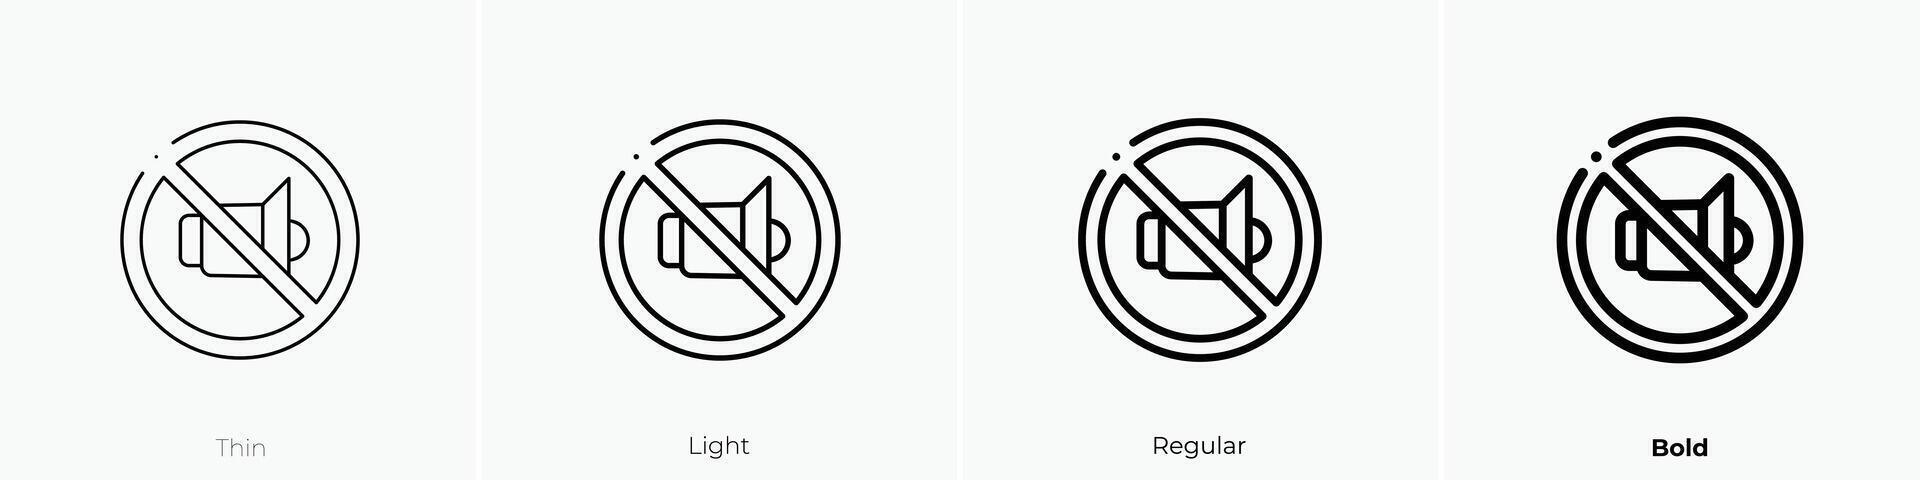 mute icon. Thin, Light, Regular And Bold style design isolated on white background vector